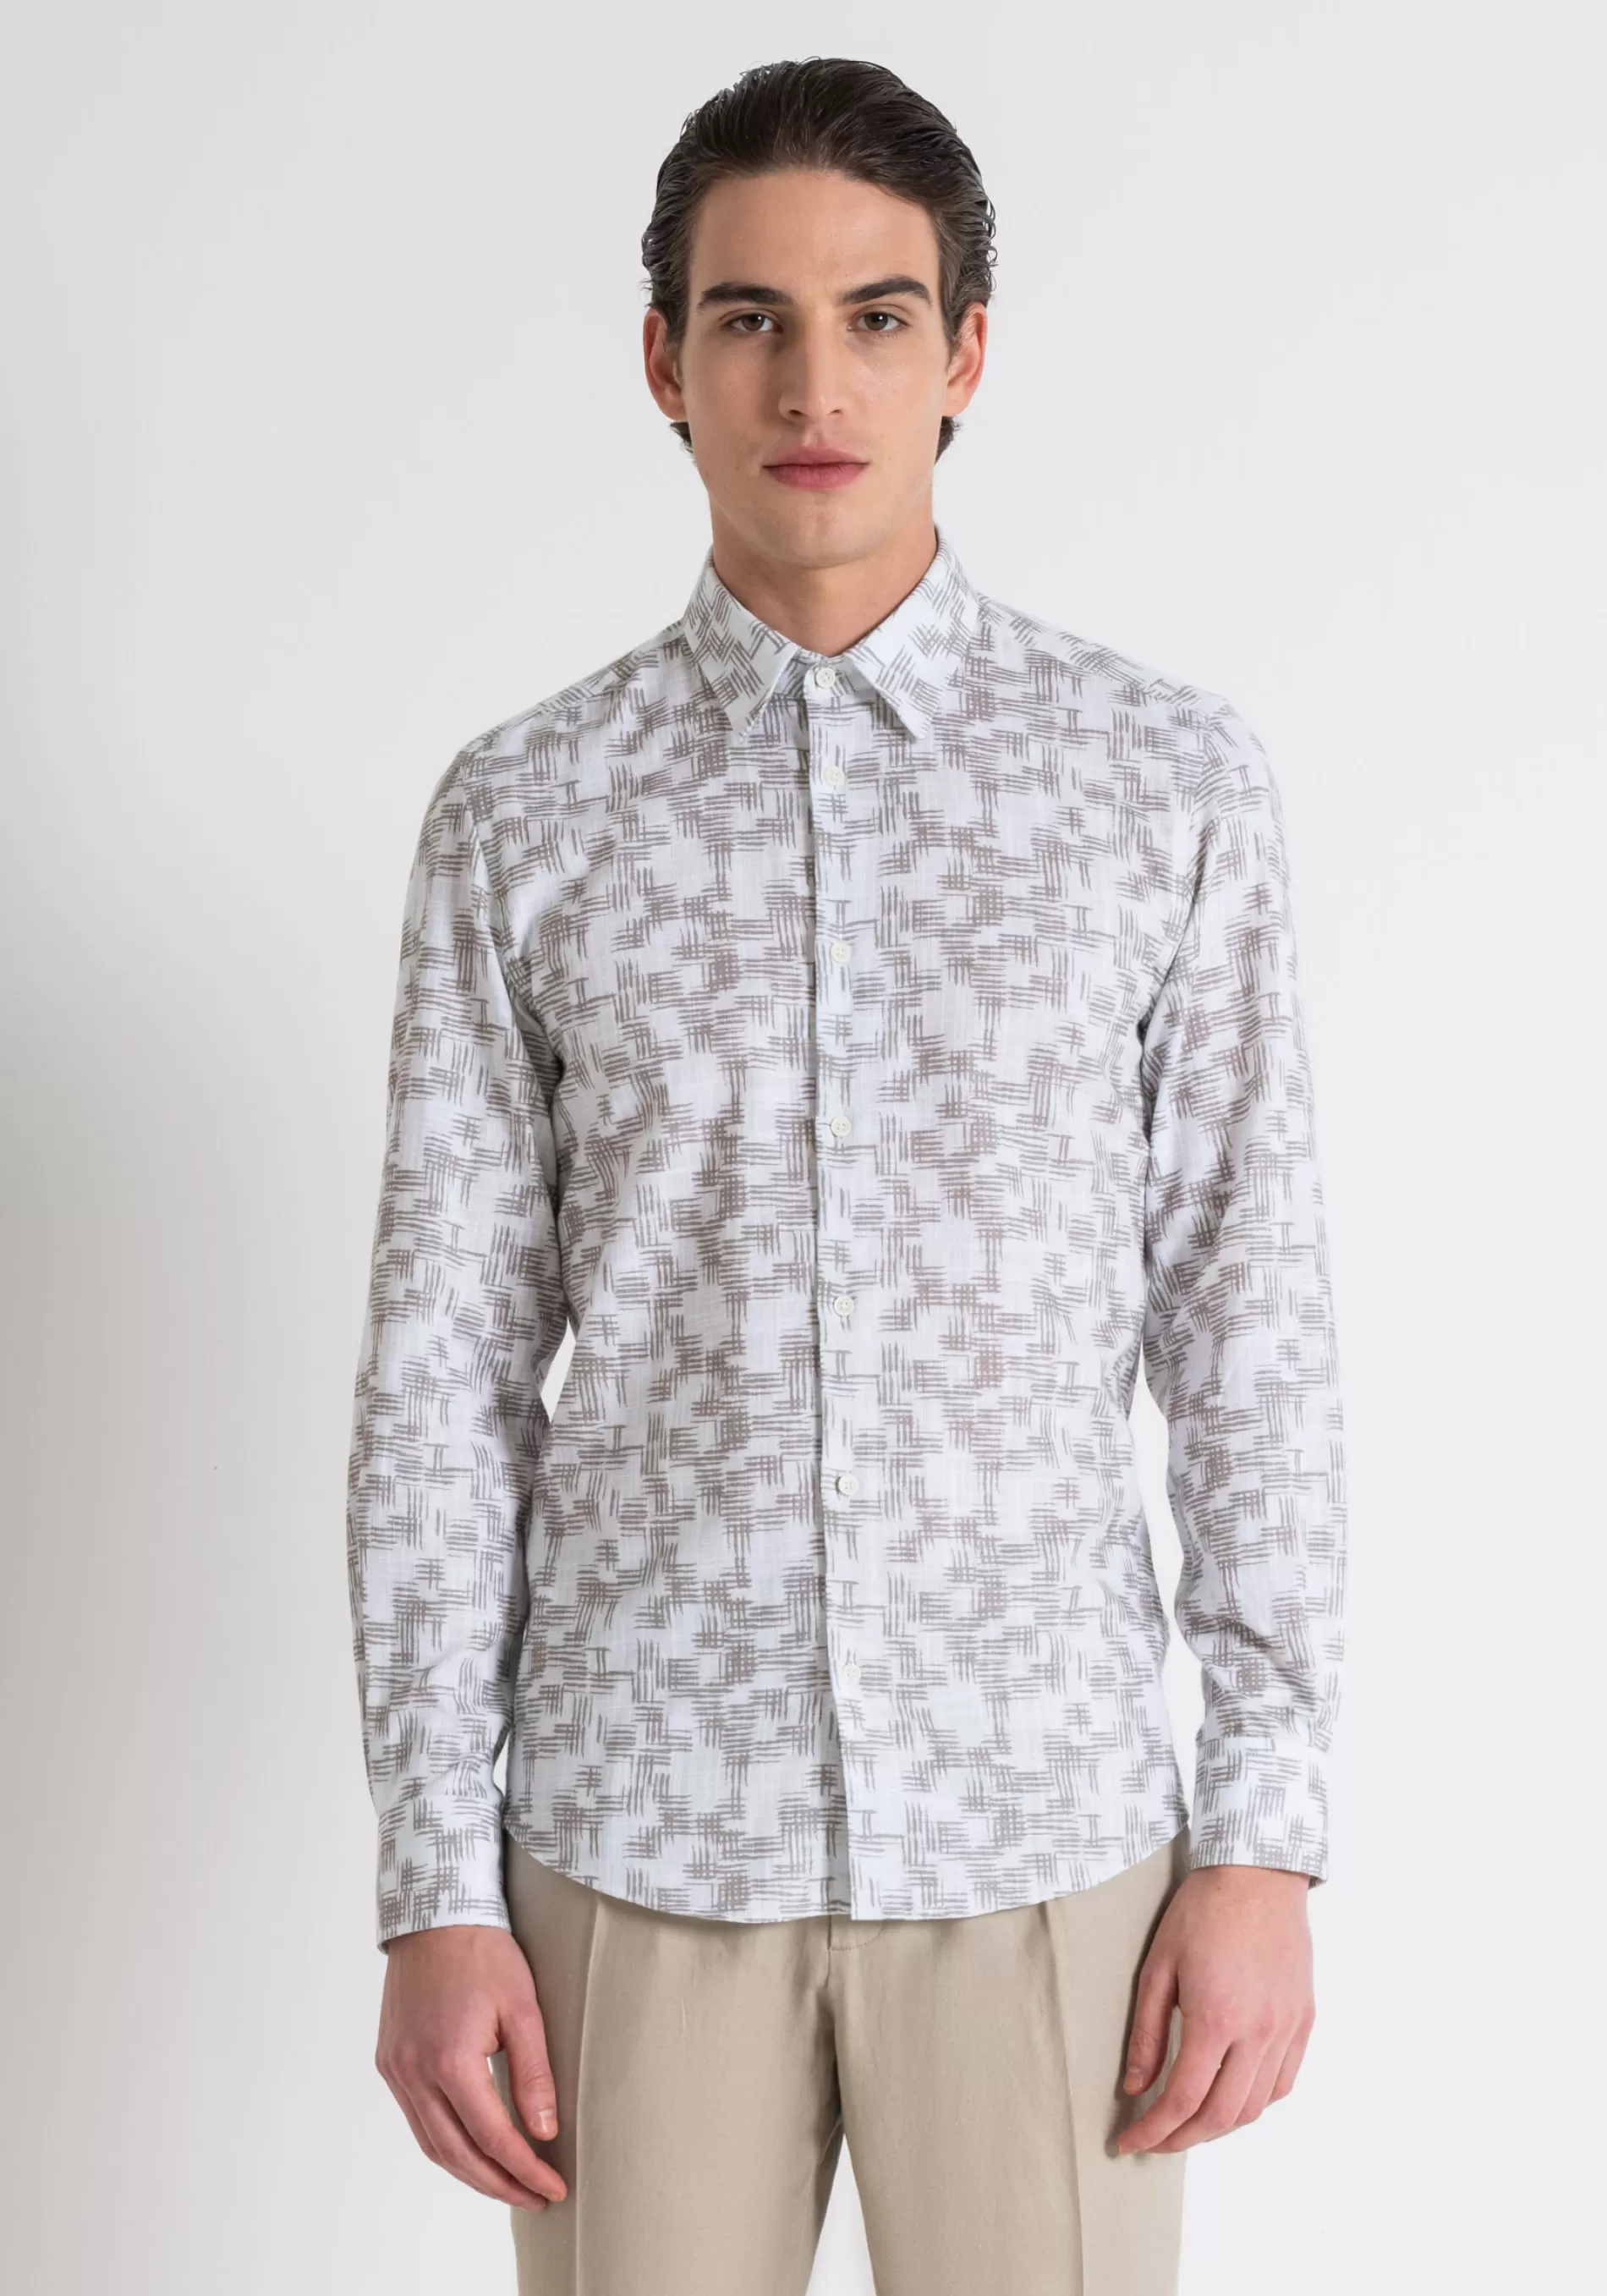 Best Sale NAPLES SLIM FIT SHIRT IN PRINTED FLAMED COTTON Shirts